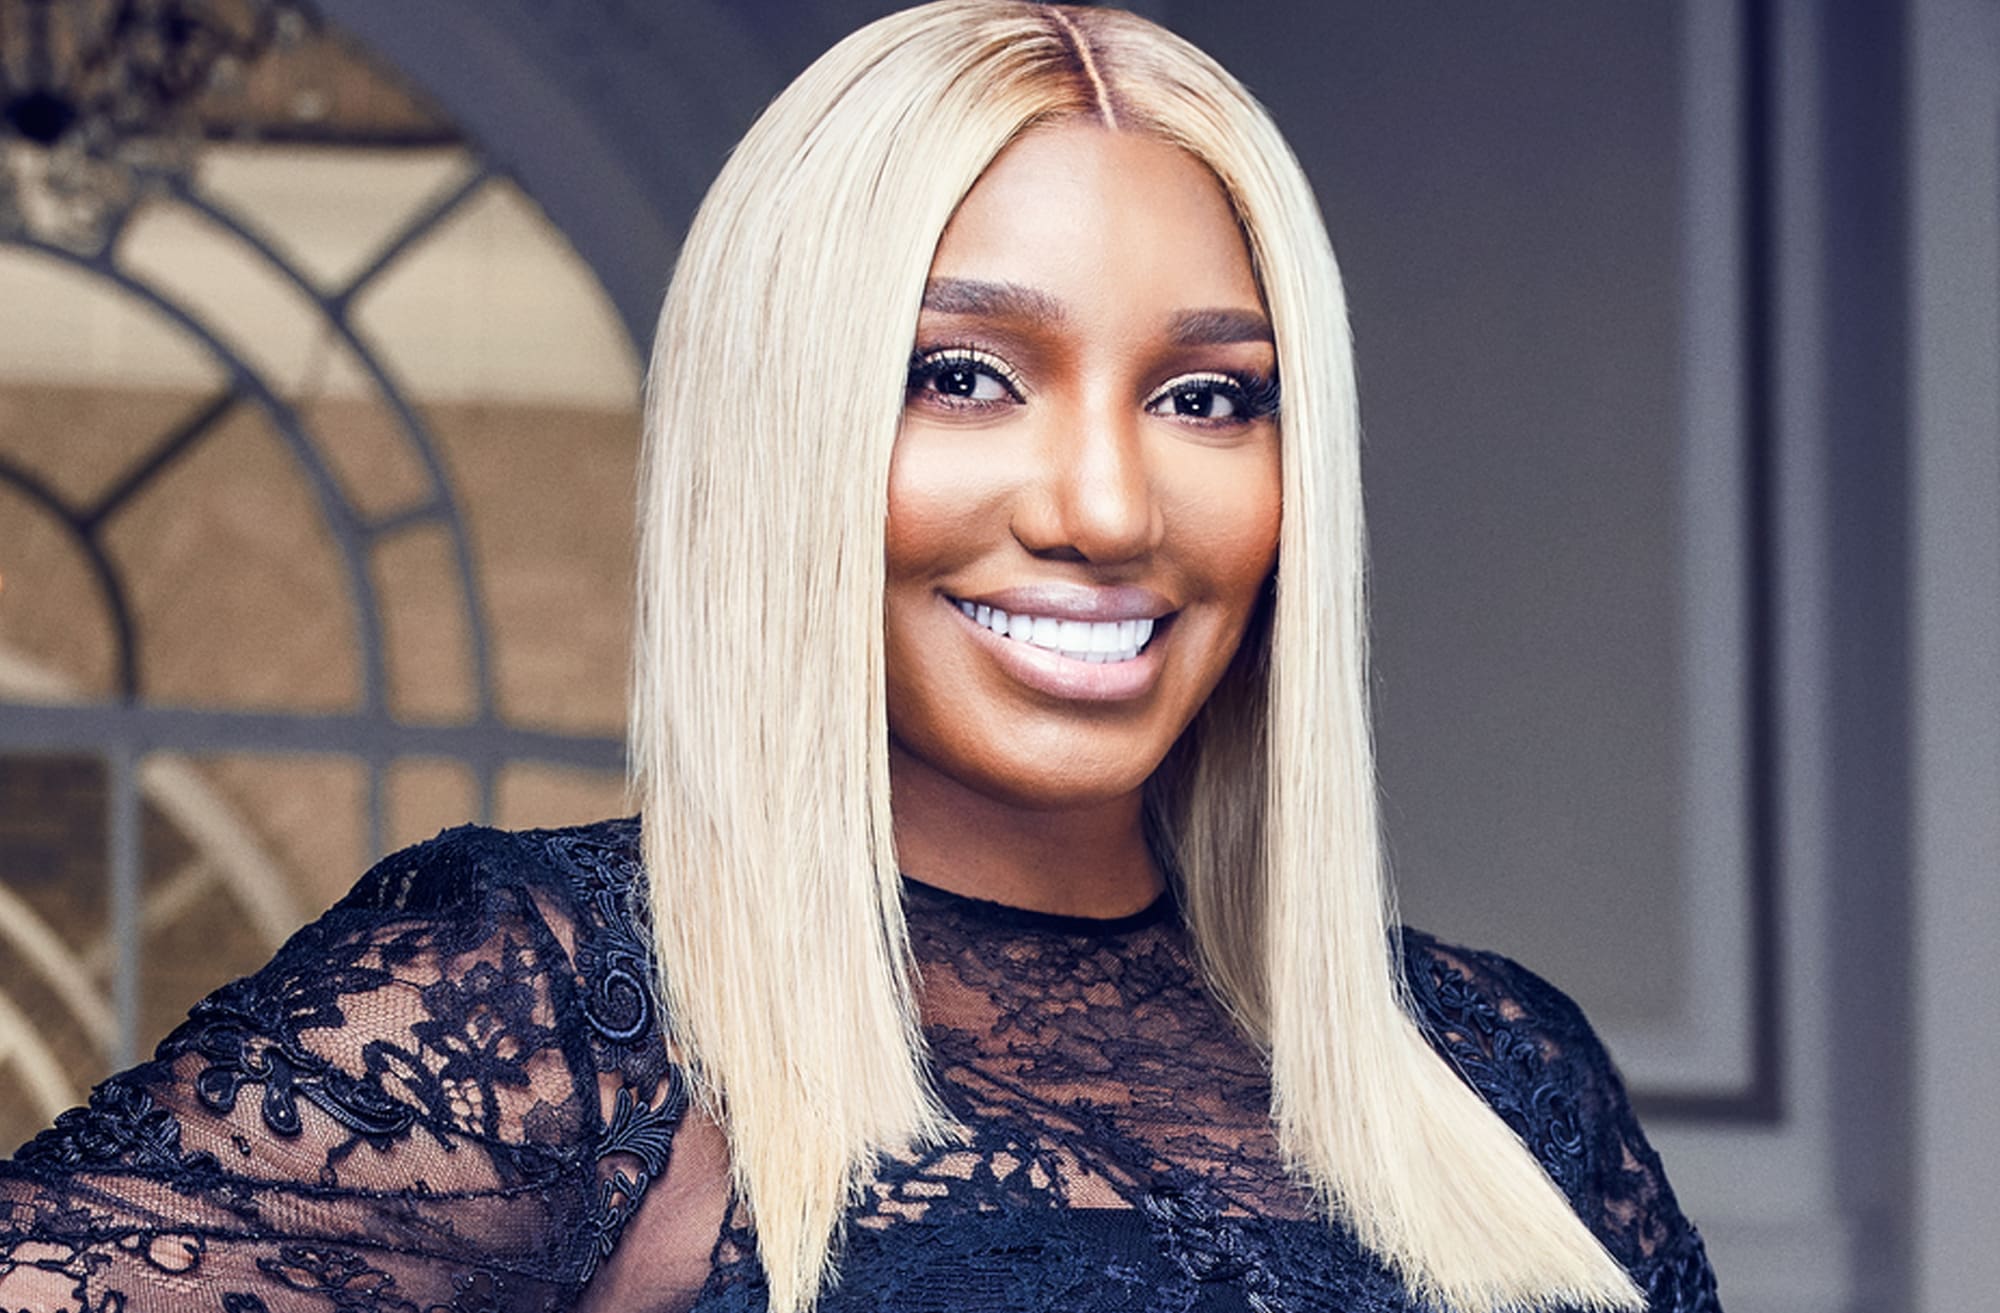 ”nene-leakes-films-clips-with-her-new-man-see-them-here”